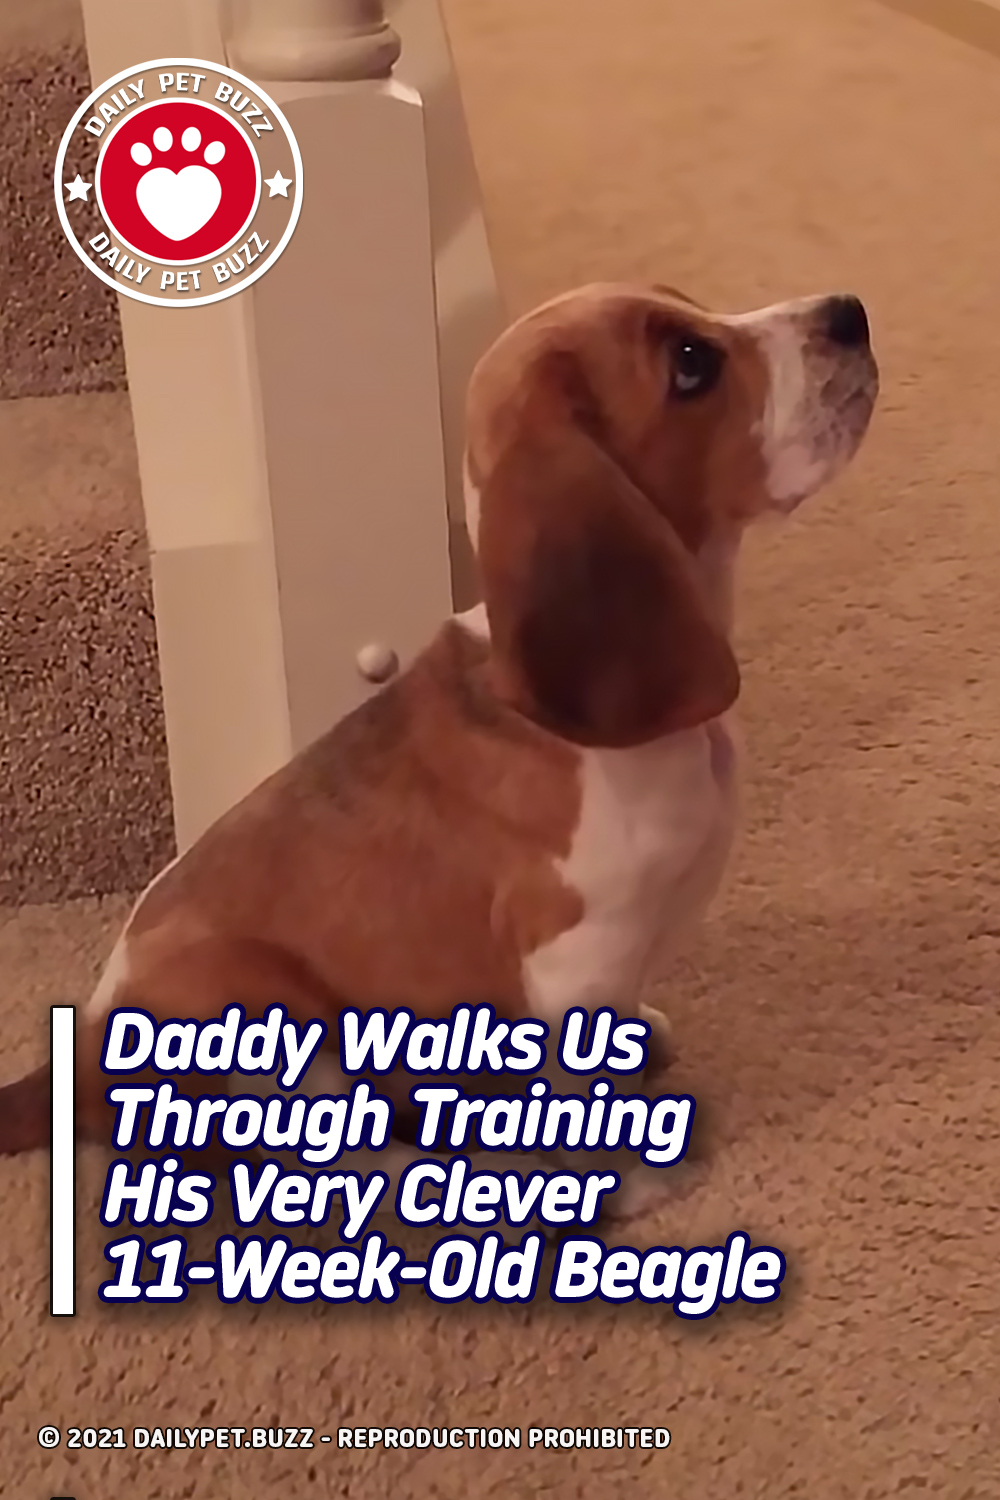 Daddy Walks Us Through Training His Very Clever 11-Week-Old Beagle